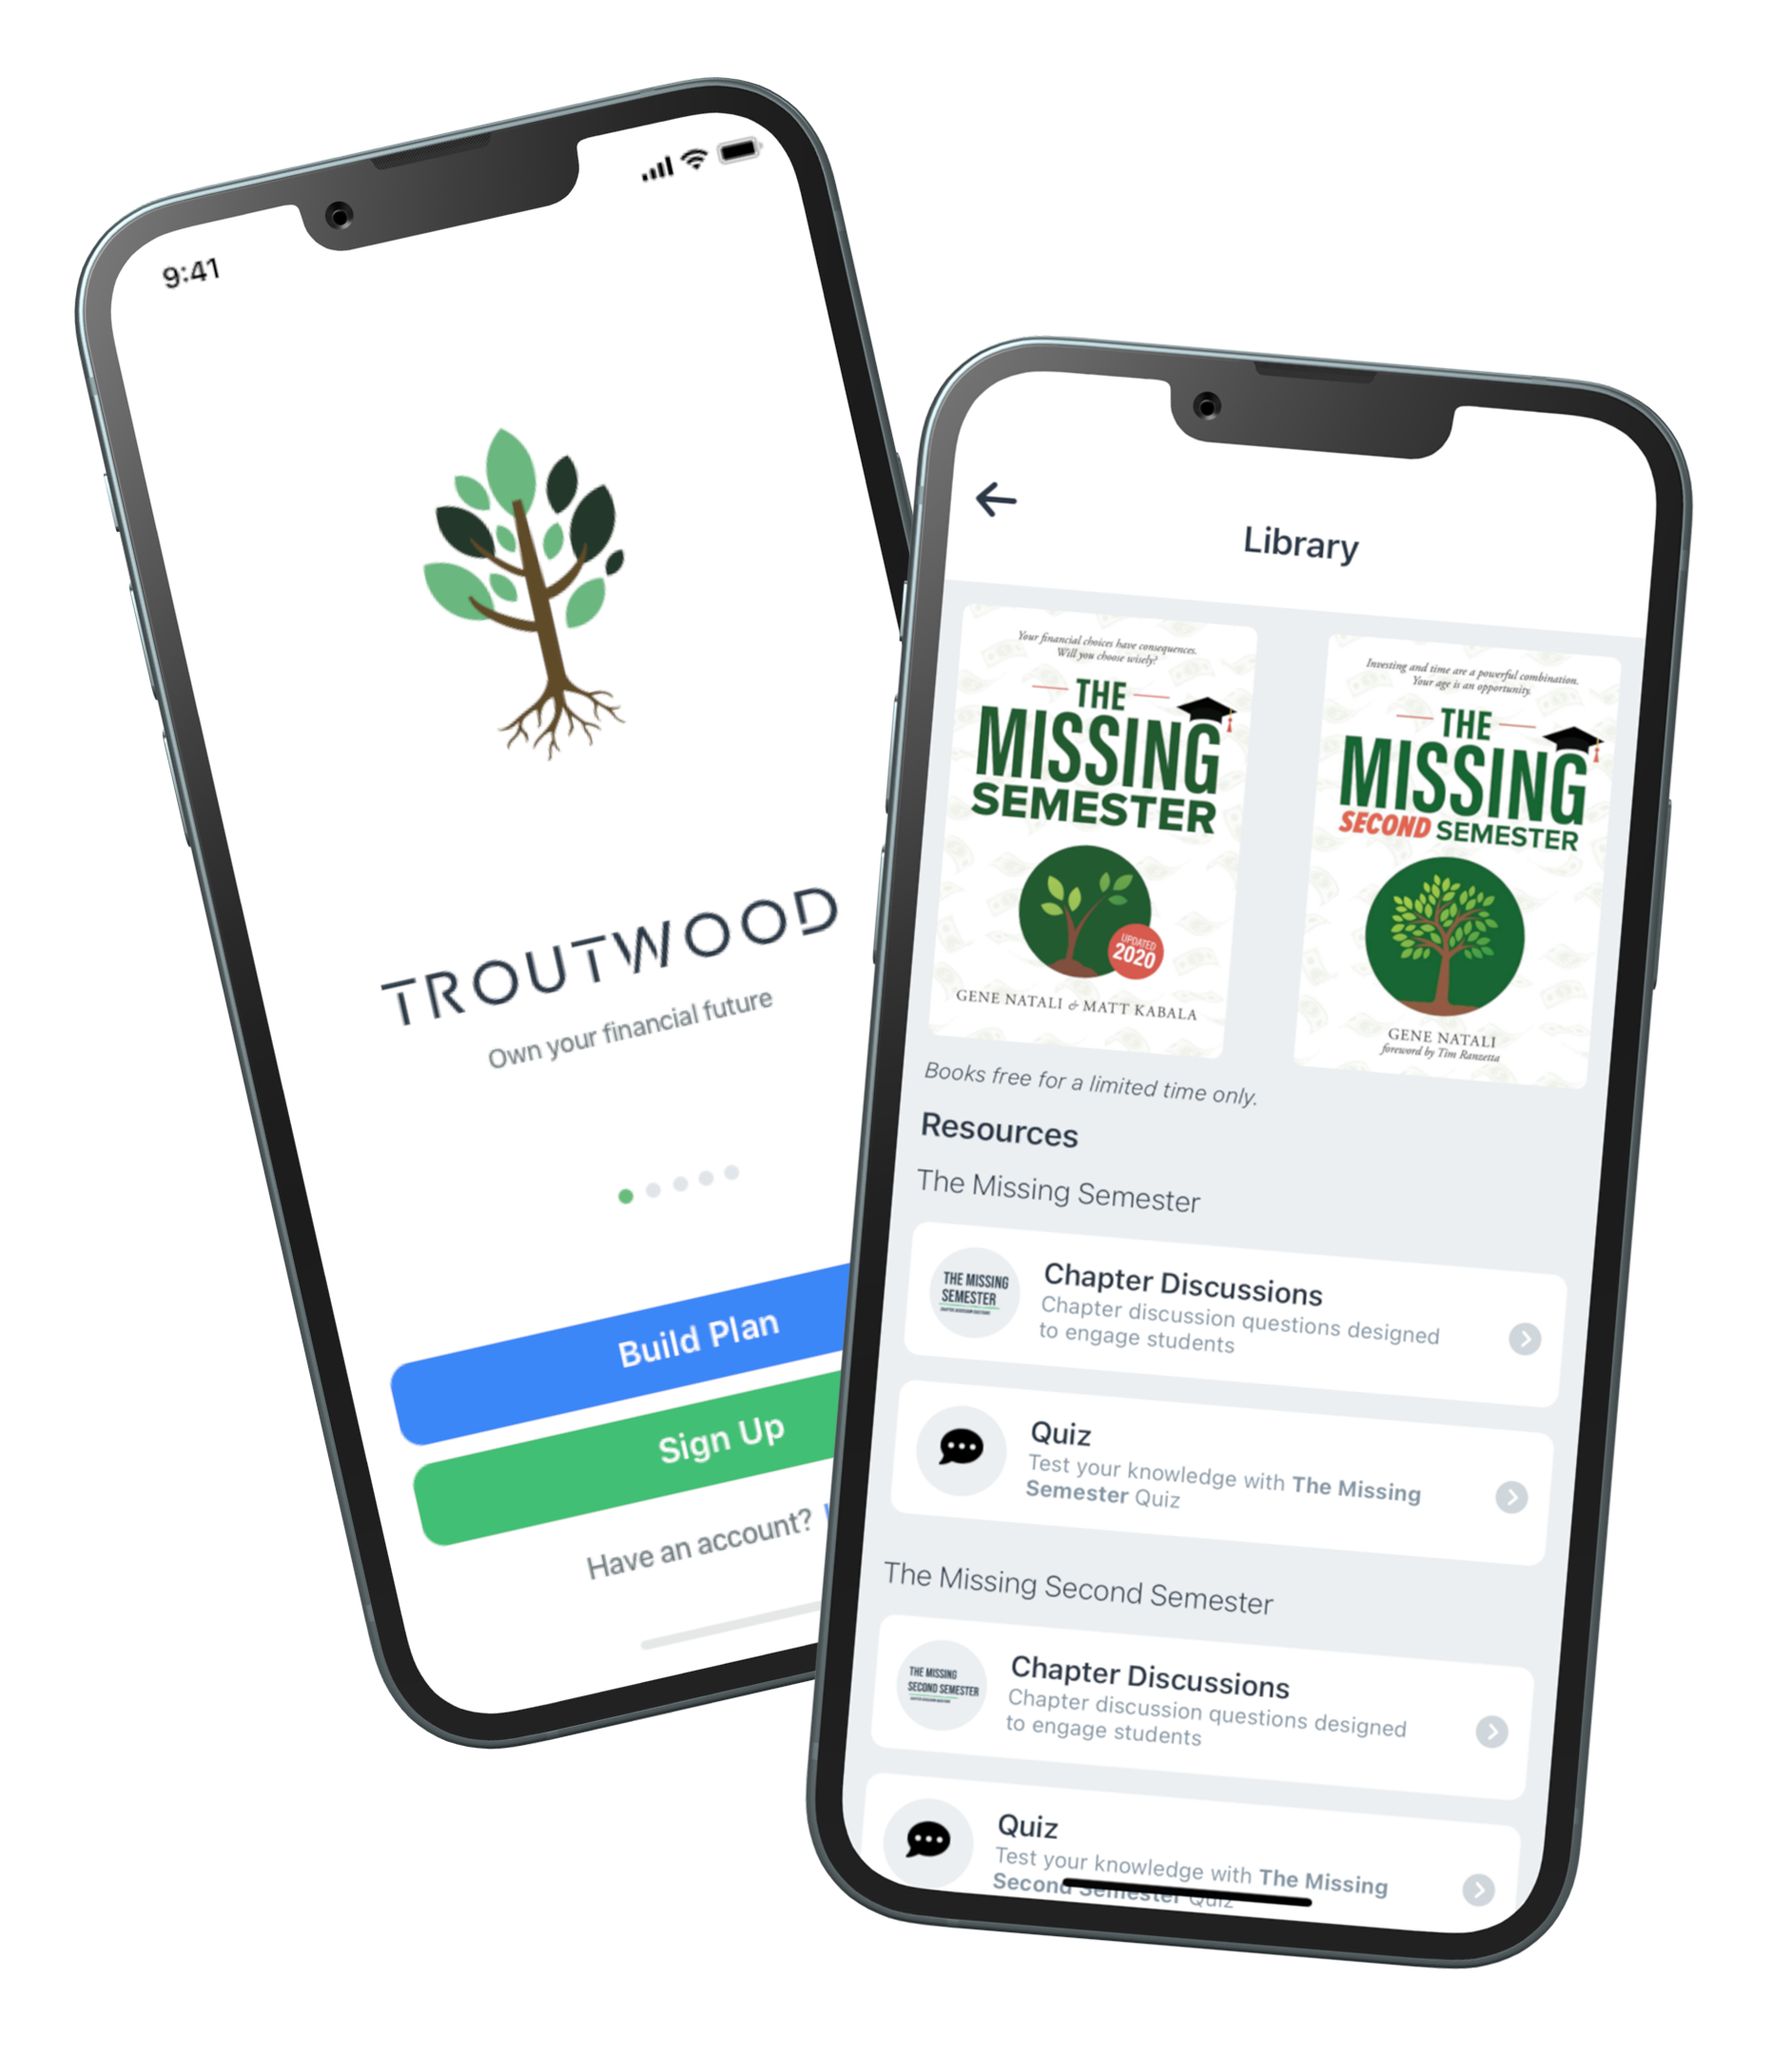 The Missing Semester by Gene Natali available on Troutwood app - a financial planning app